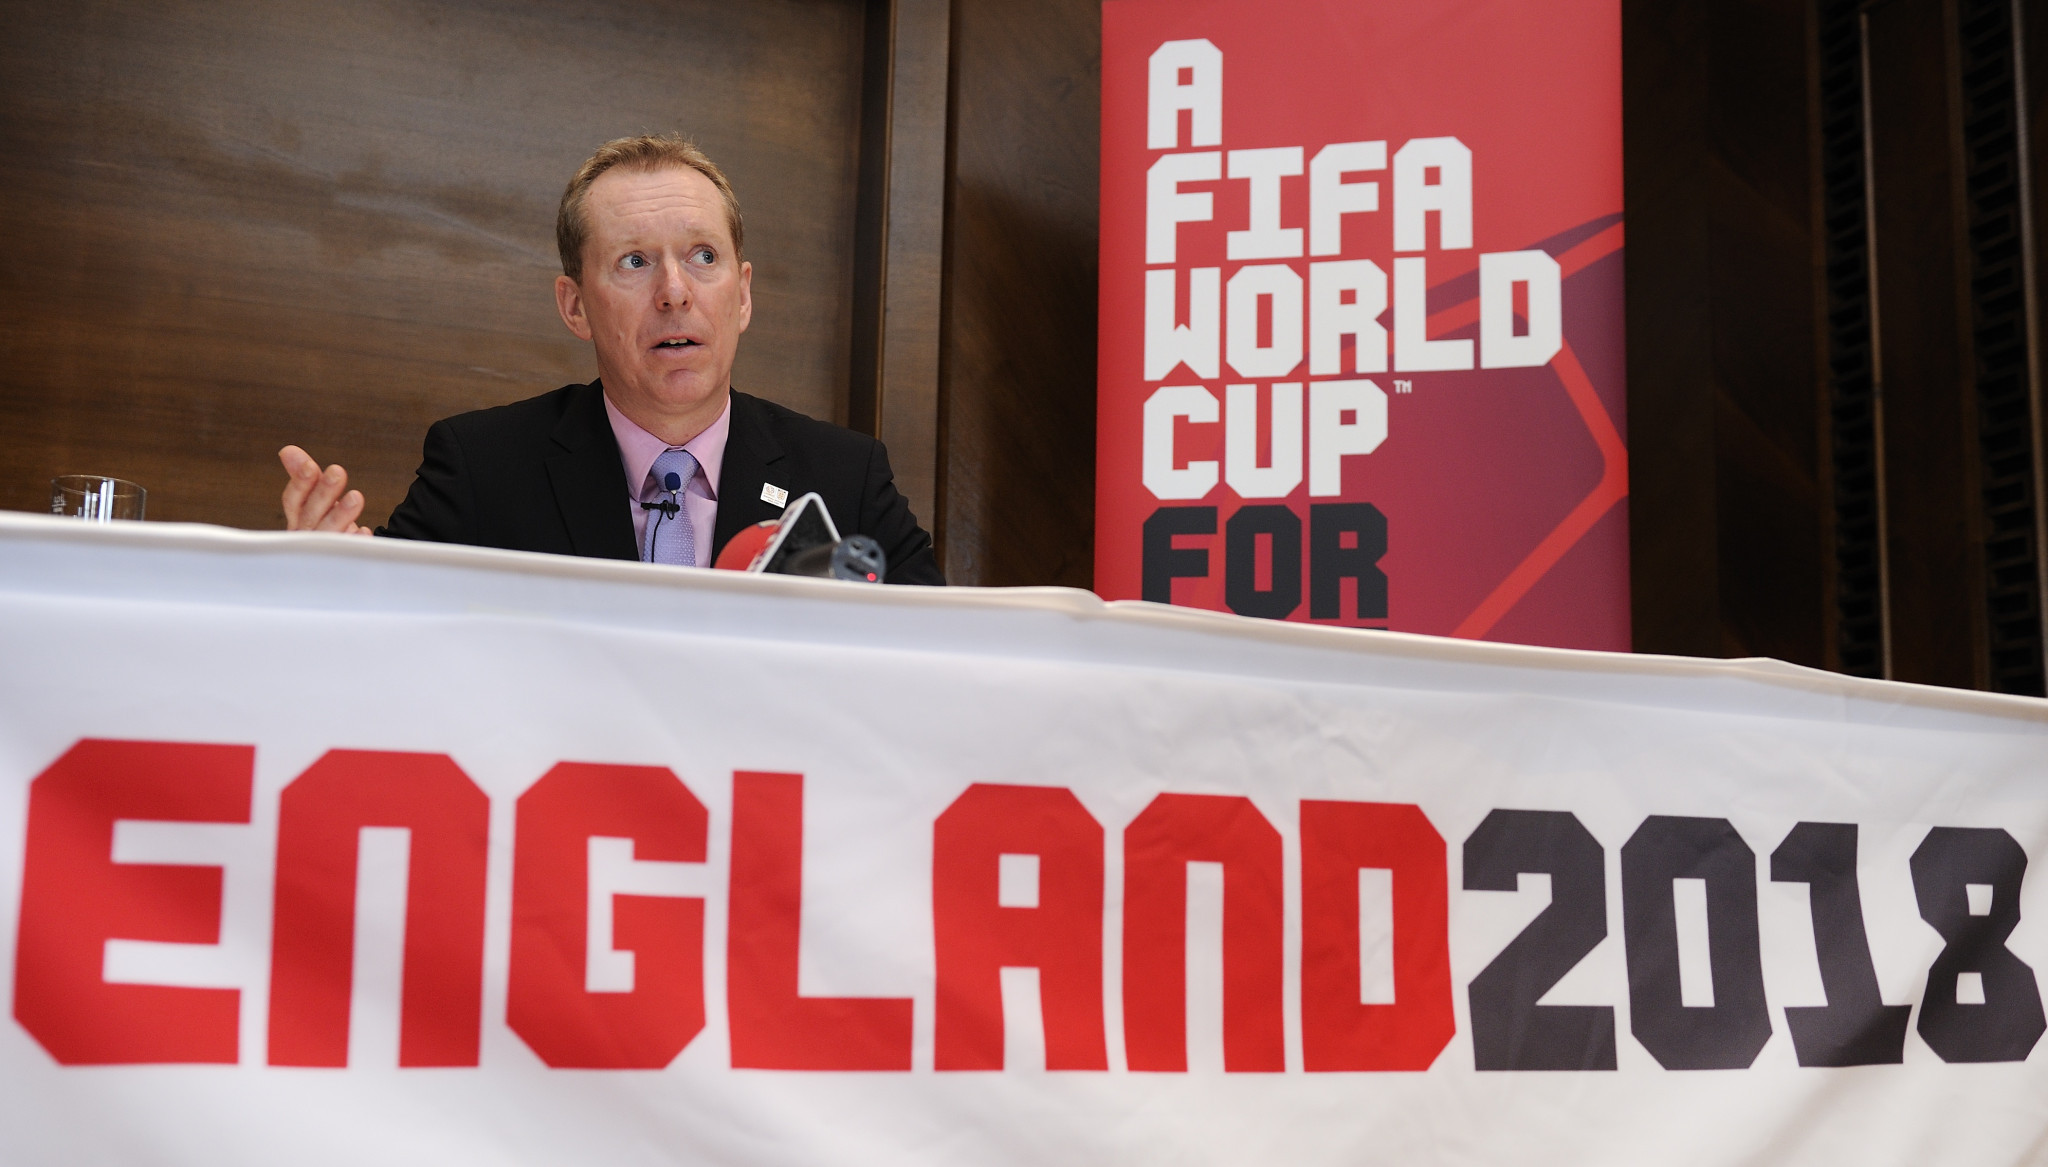 Andy Anson was the chief executive of the company behind England's bid to host the 2018 FIFA World Cup ©Getty Images